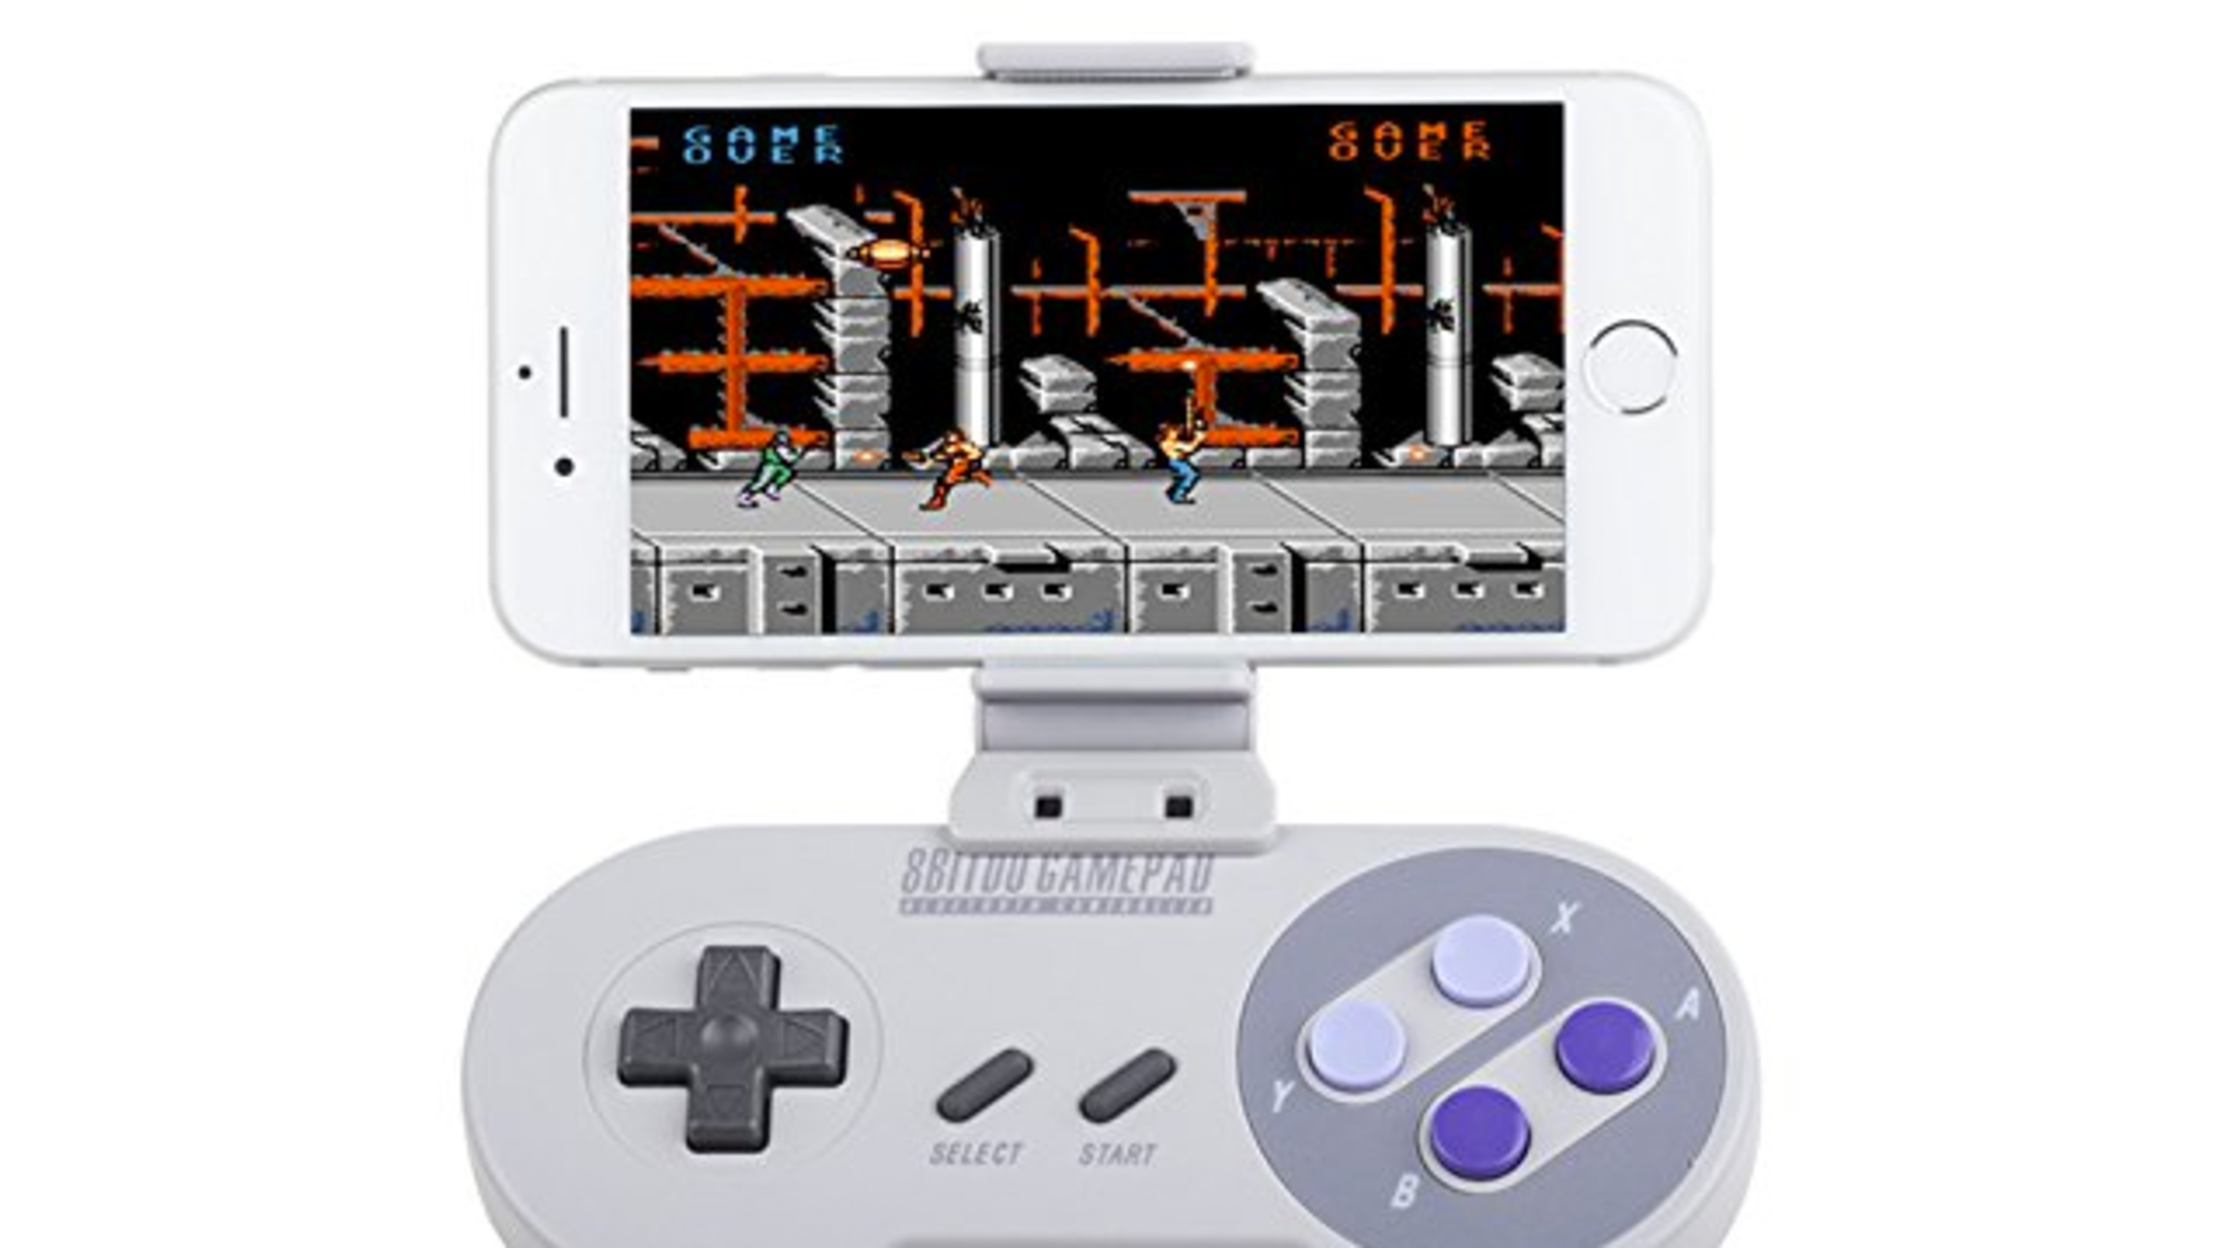 New Snes Controller Lets You Play Retro Games On Your Phone Mental Floss